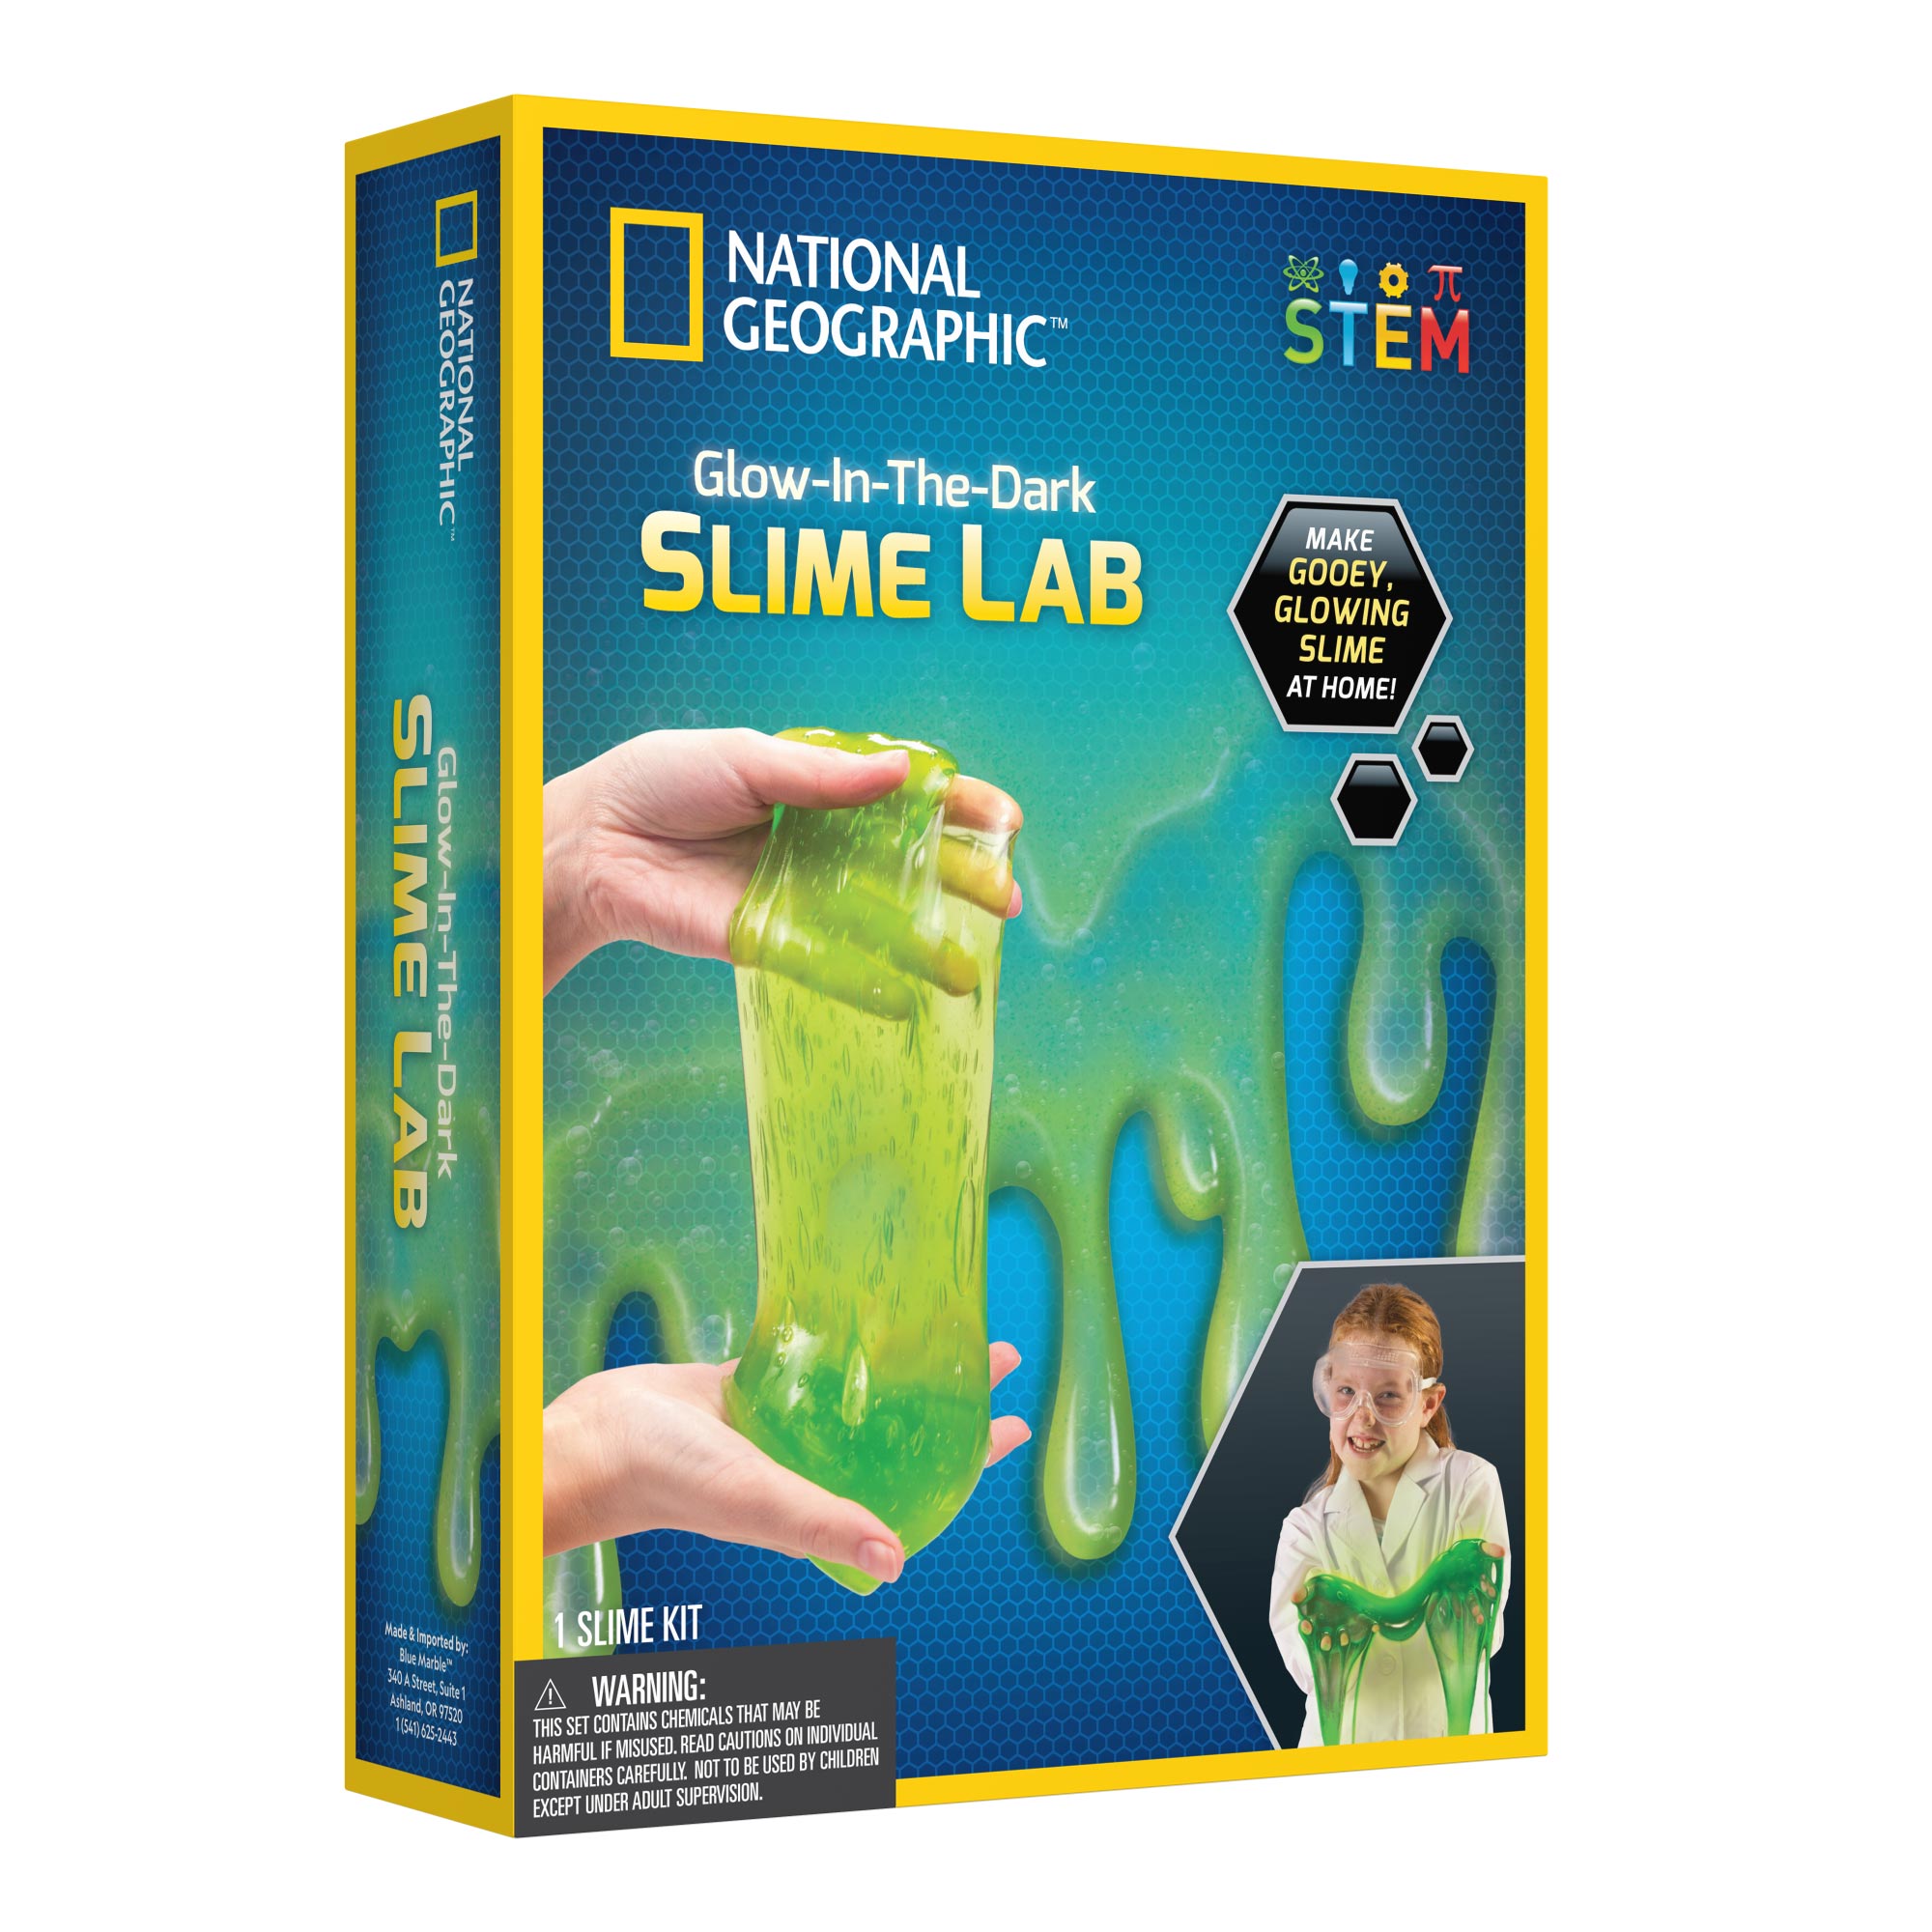 National Geographic Glow-in-the-Dark Slime Lab –